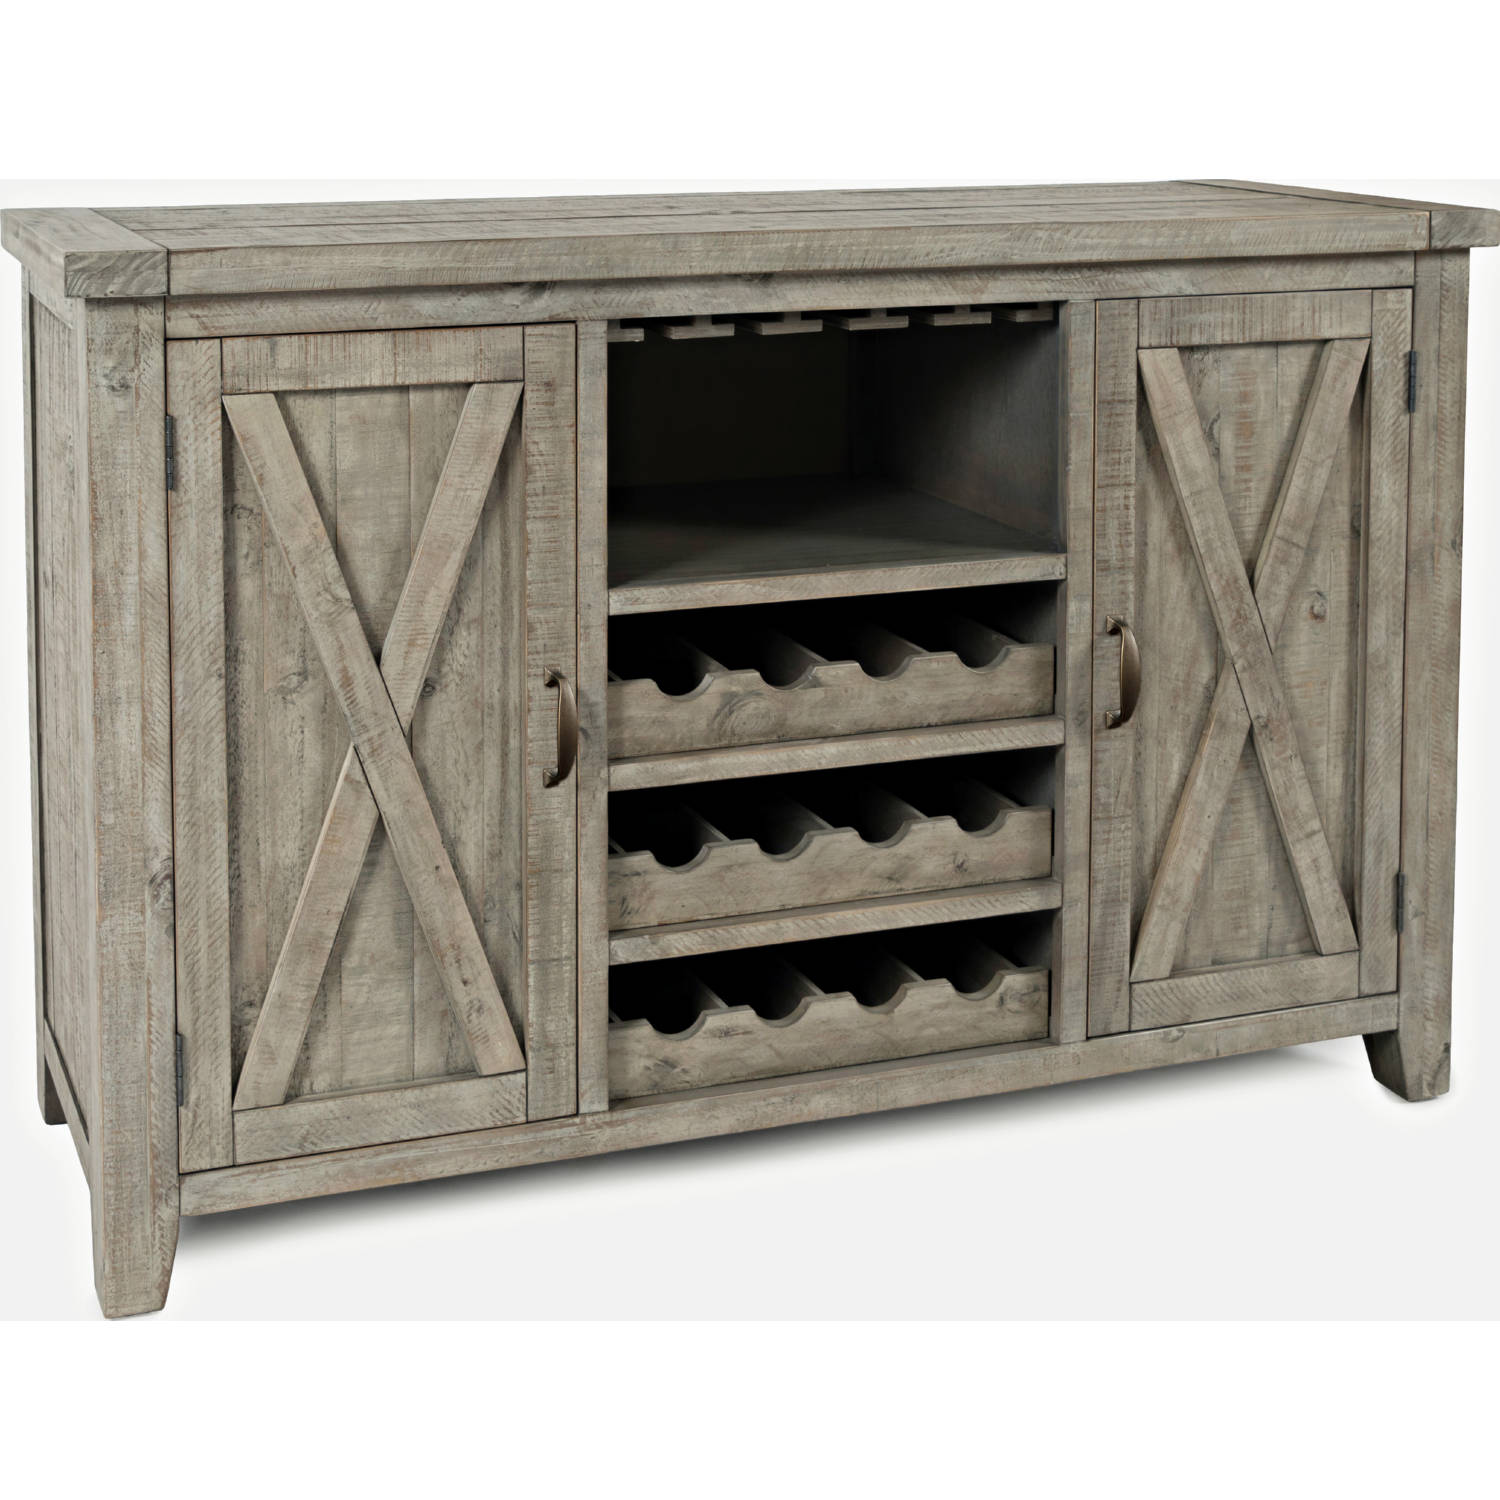 Jofran 1841 95 Outer Banks Server In Driftwood Finish Reclaimed Wood